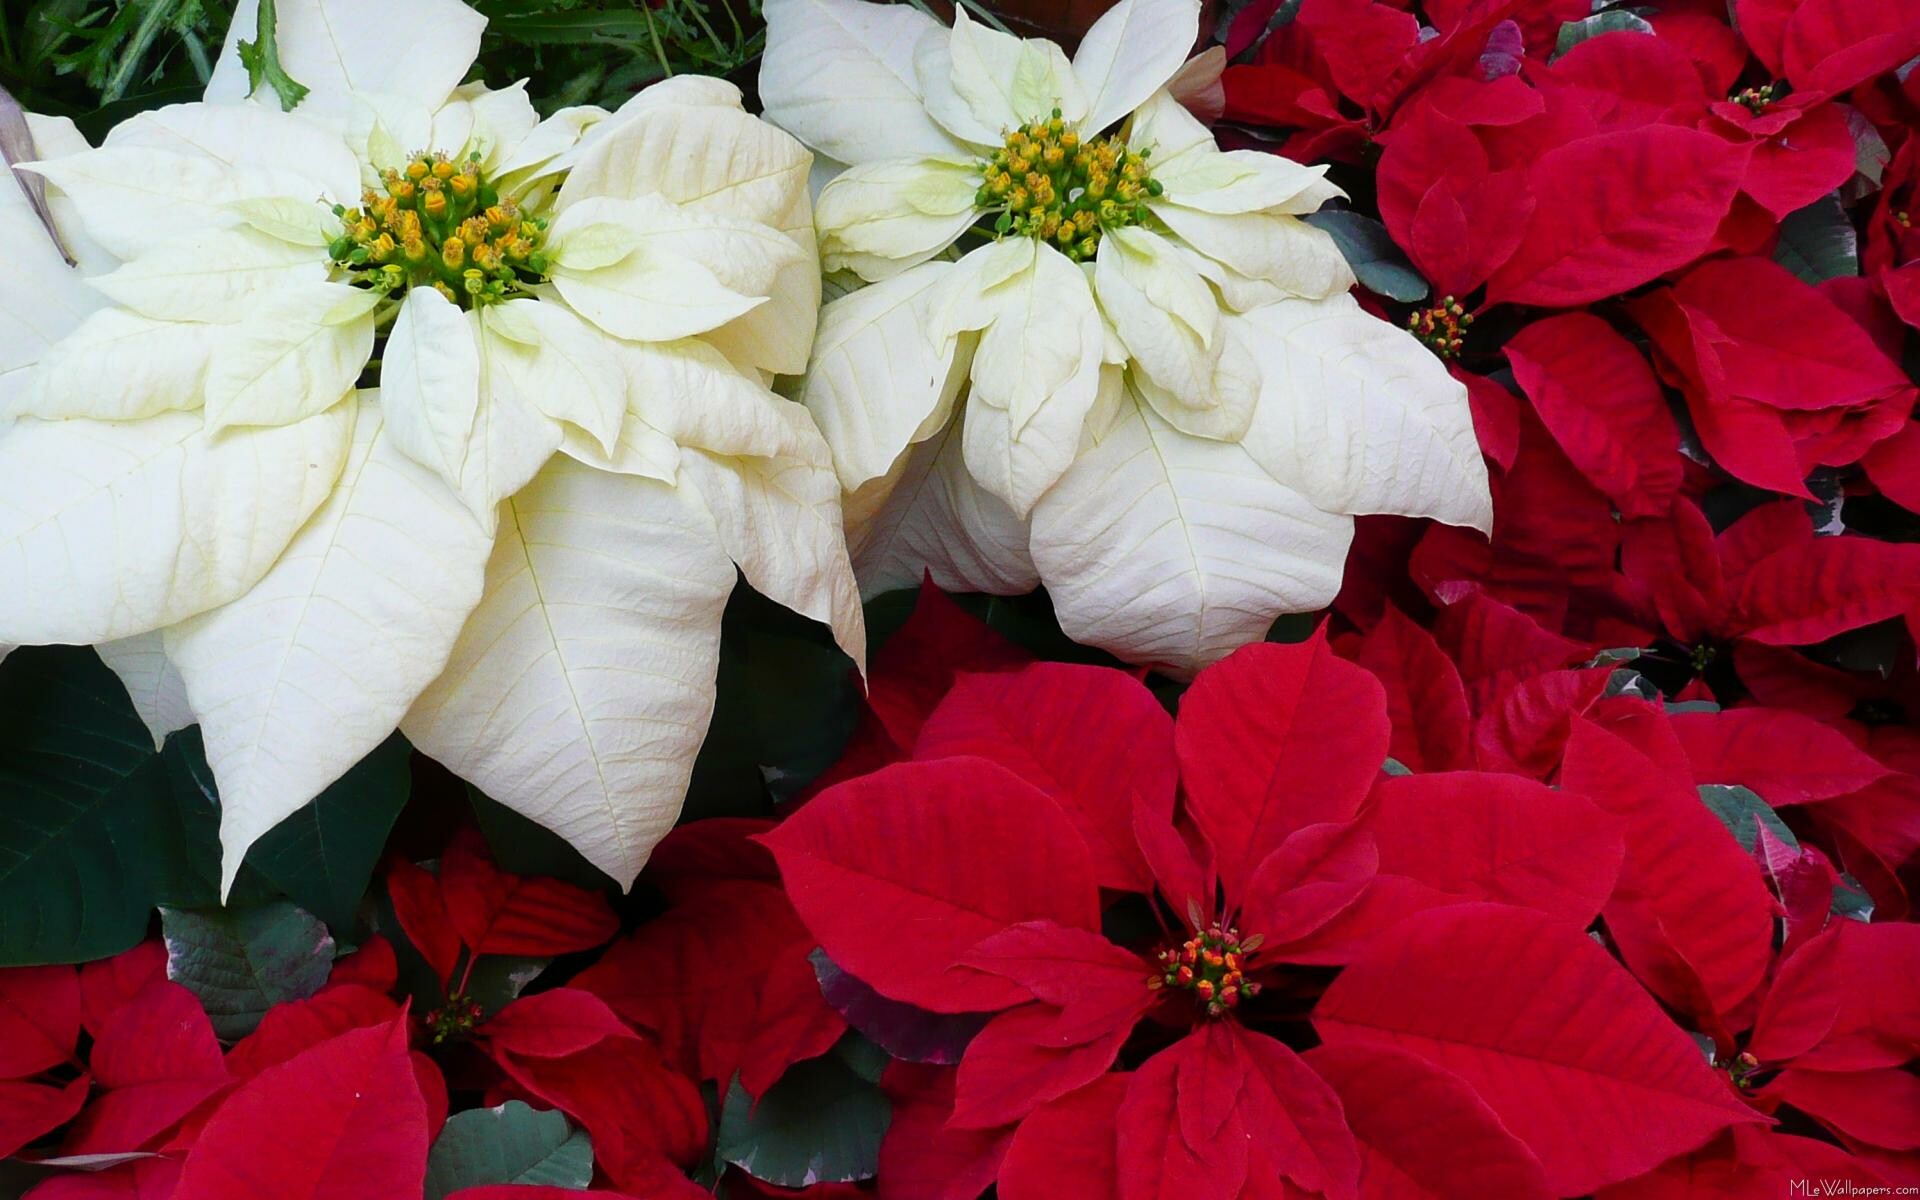 Poinsettia: Named for Joel R Poinsett, who popularized the plant and introduced it to floriculture while he was US minister to Mexico in the late 1820s. 1920x1200 HD Wallpaper.